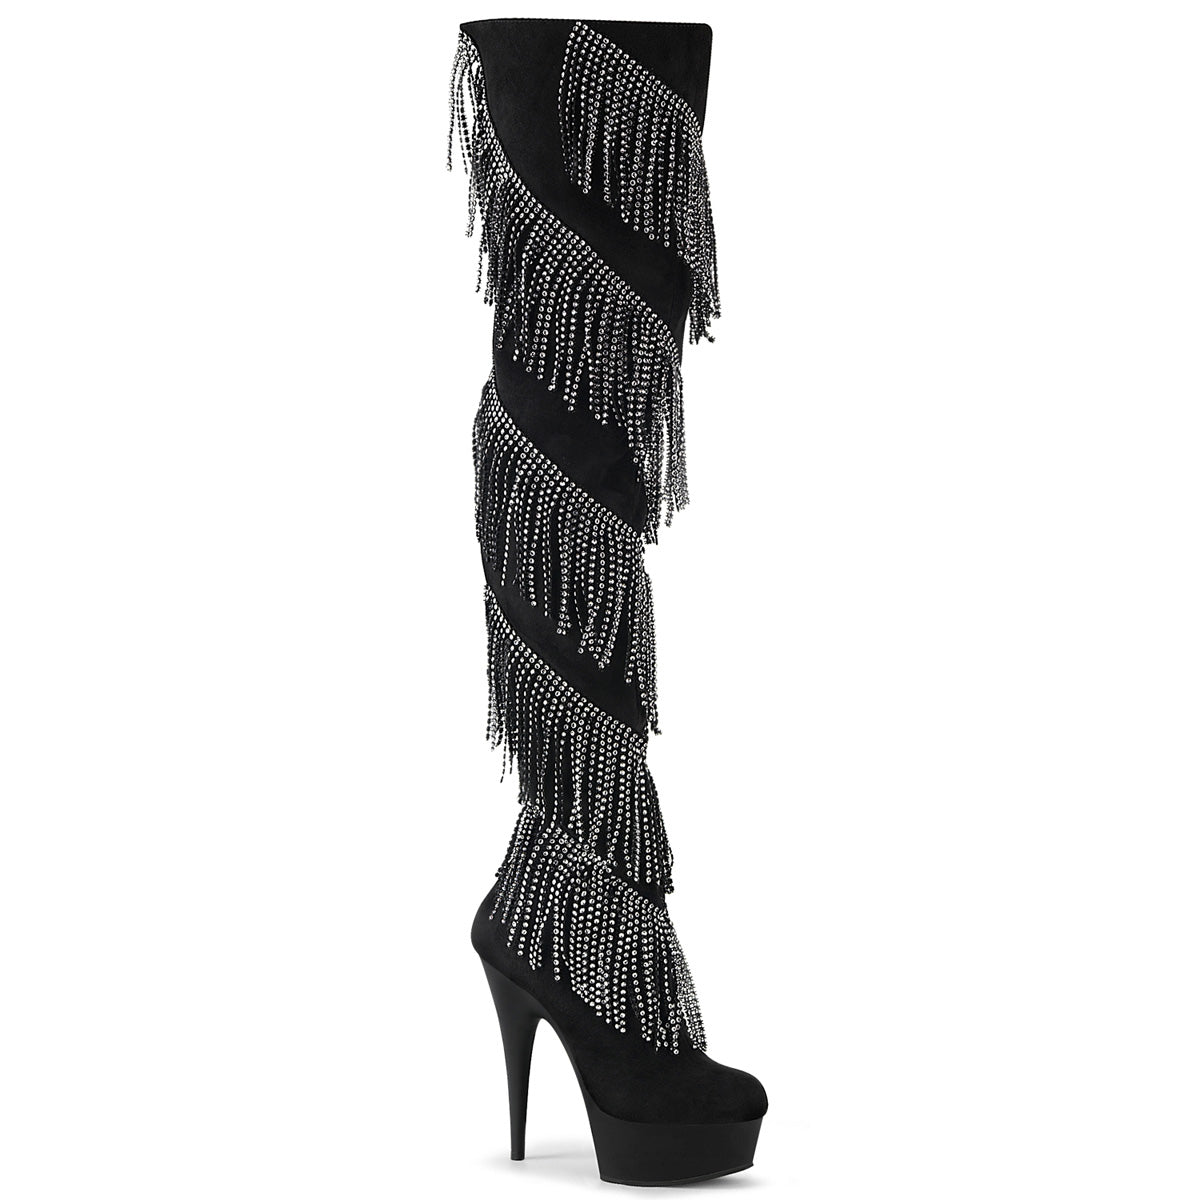 Passistas Thigh High Boots